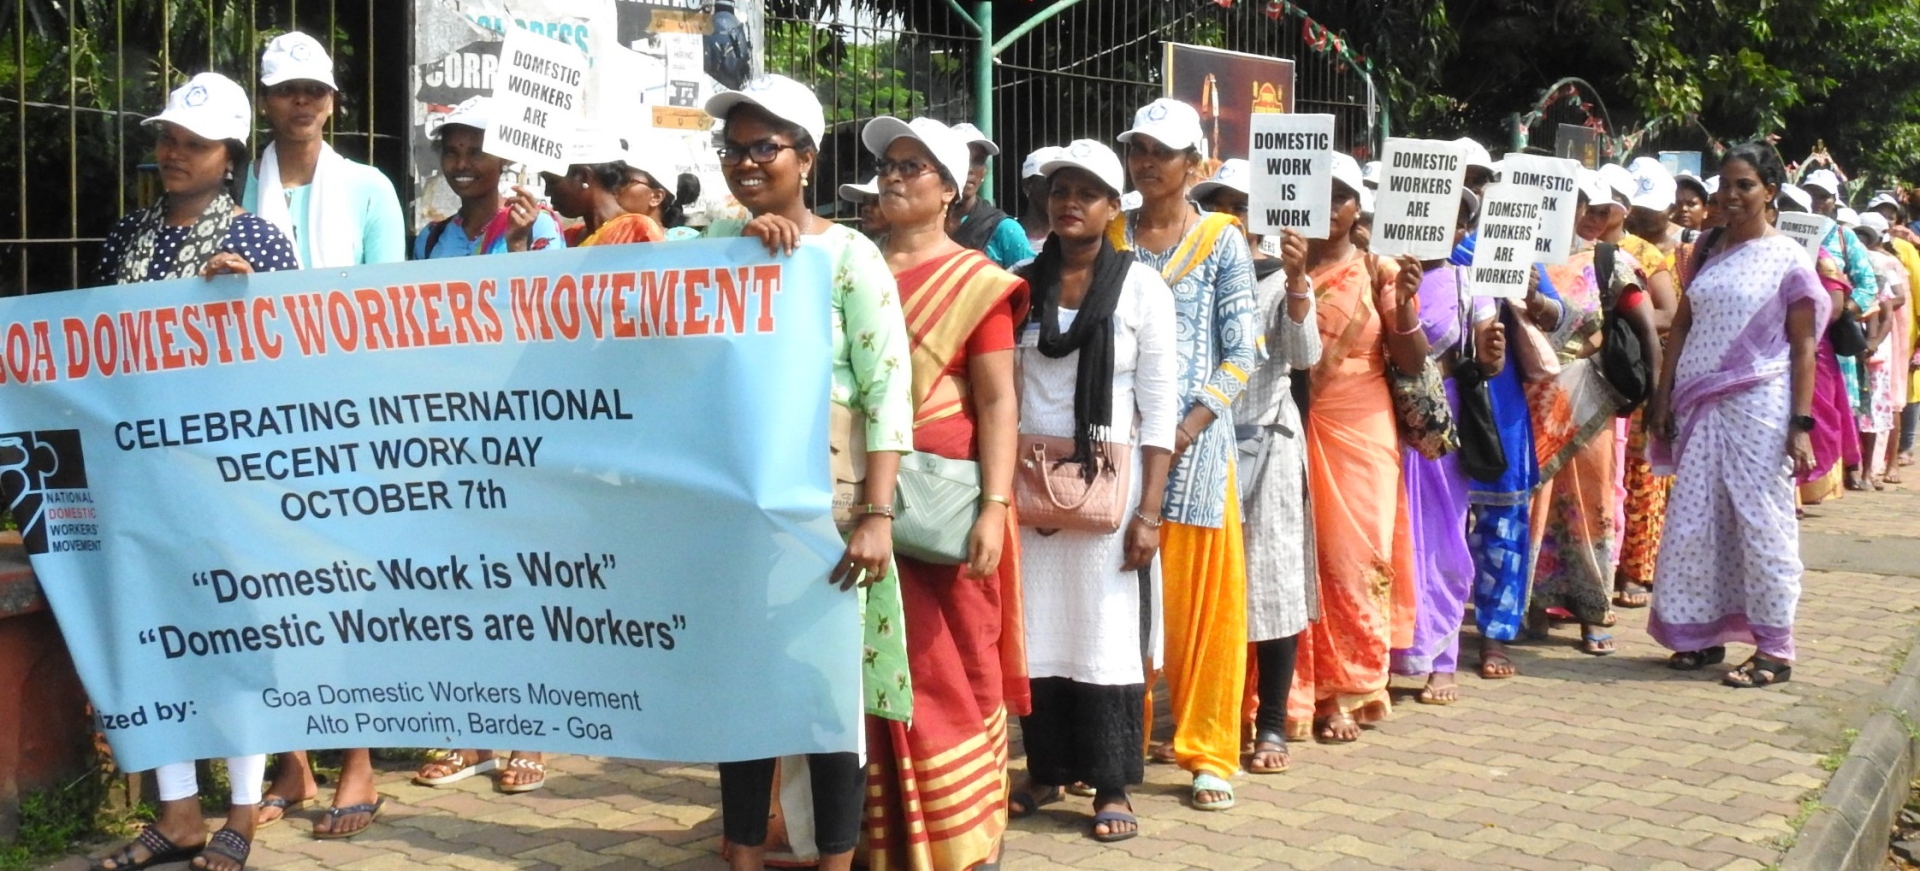 Domestic workers want Social Security Board constituted